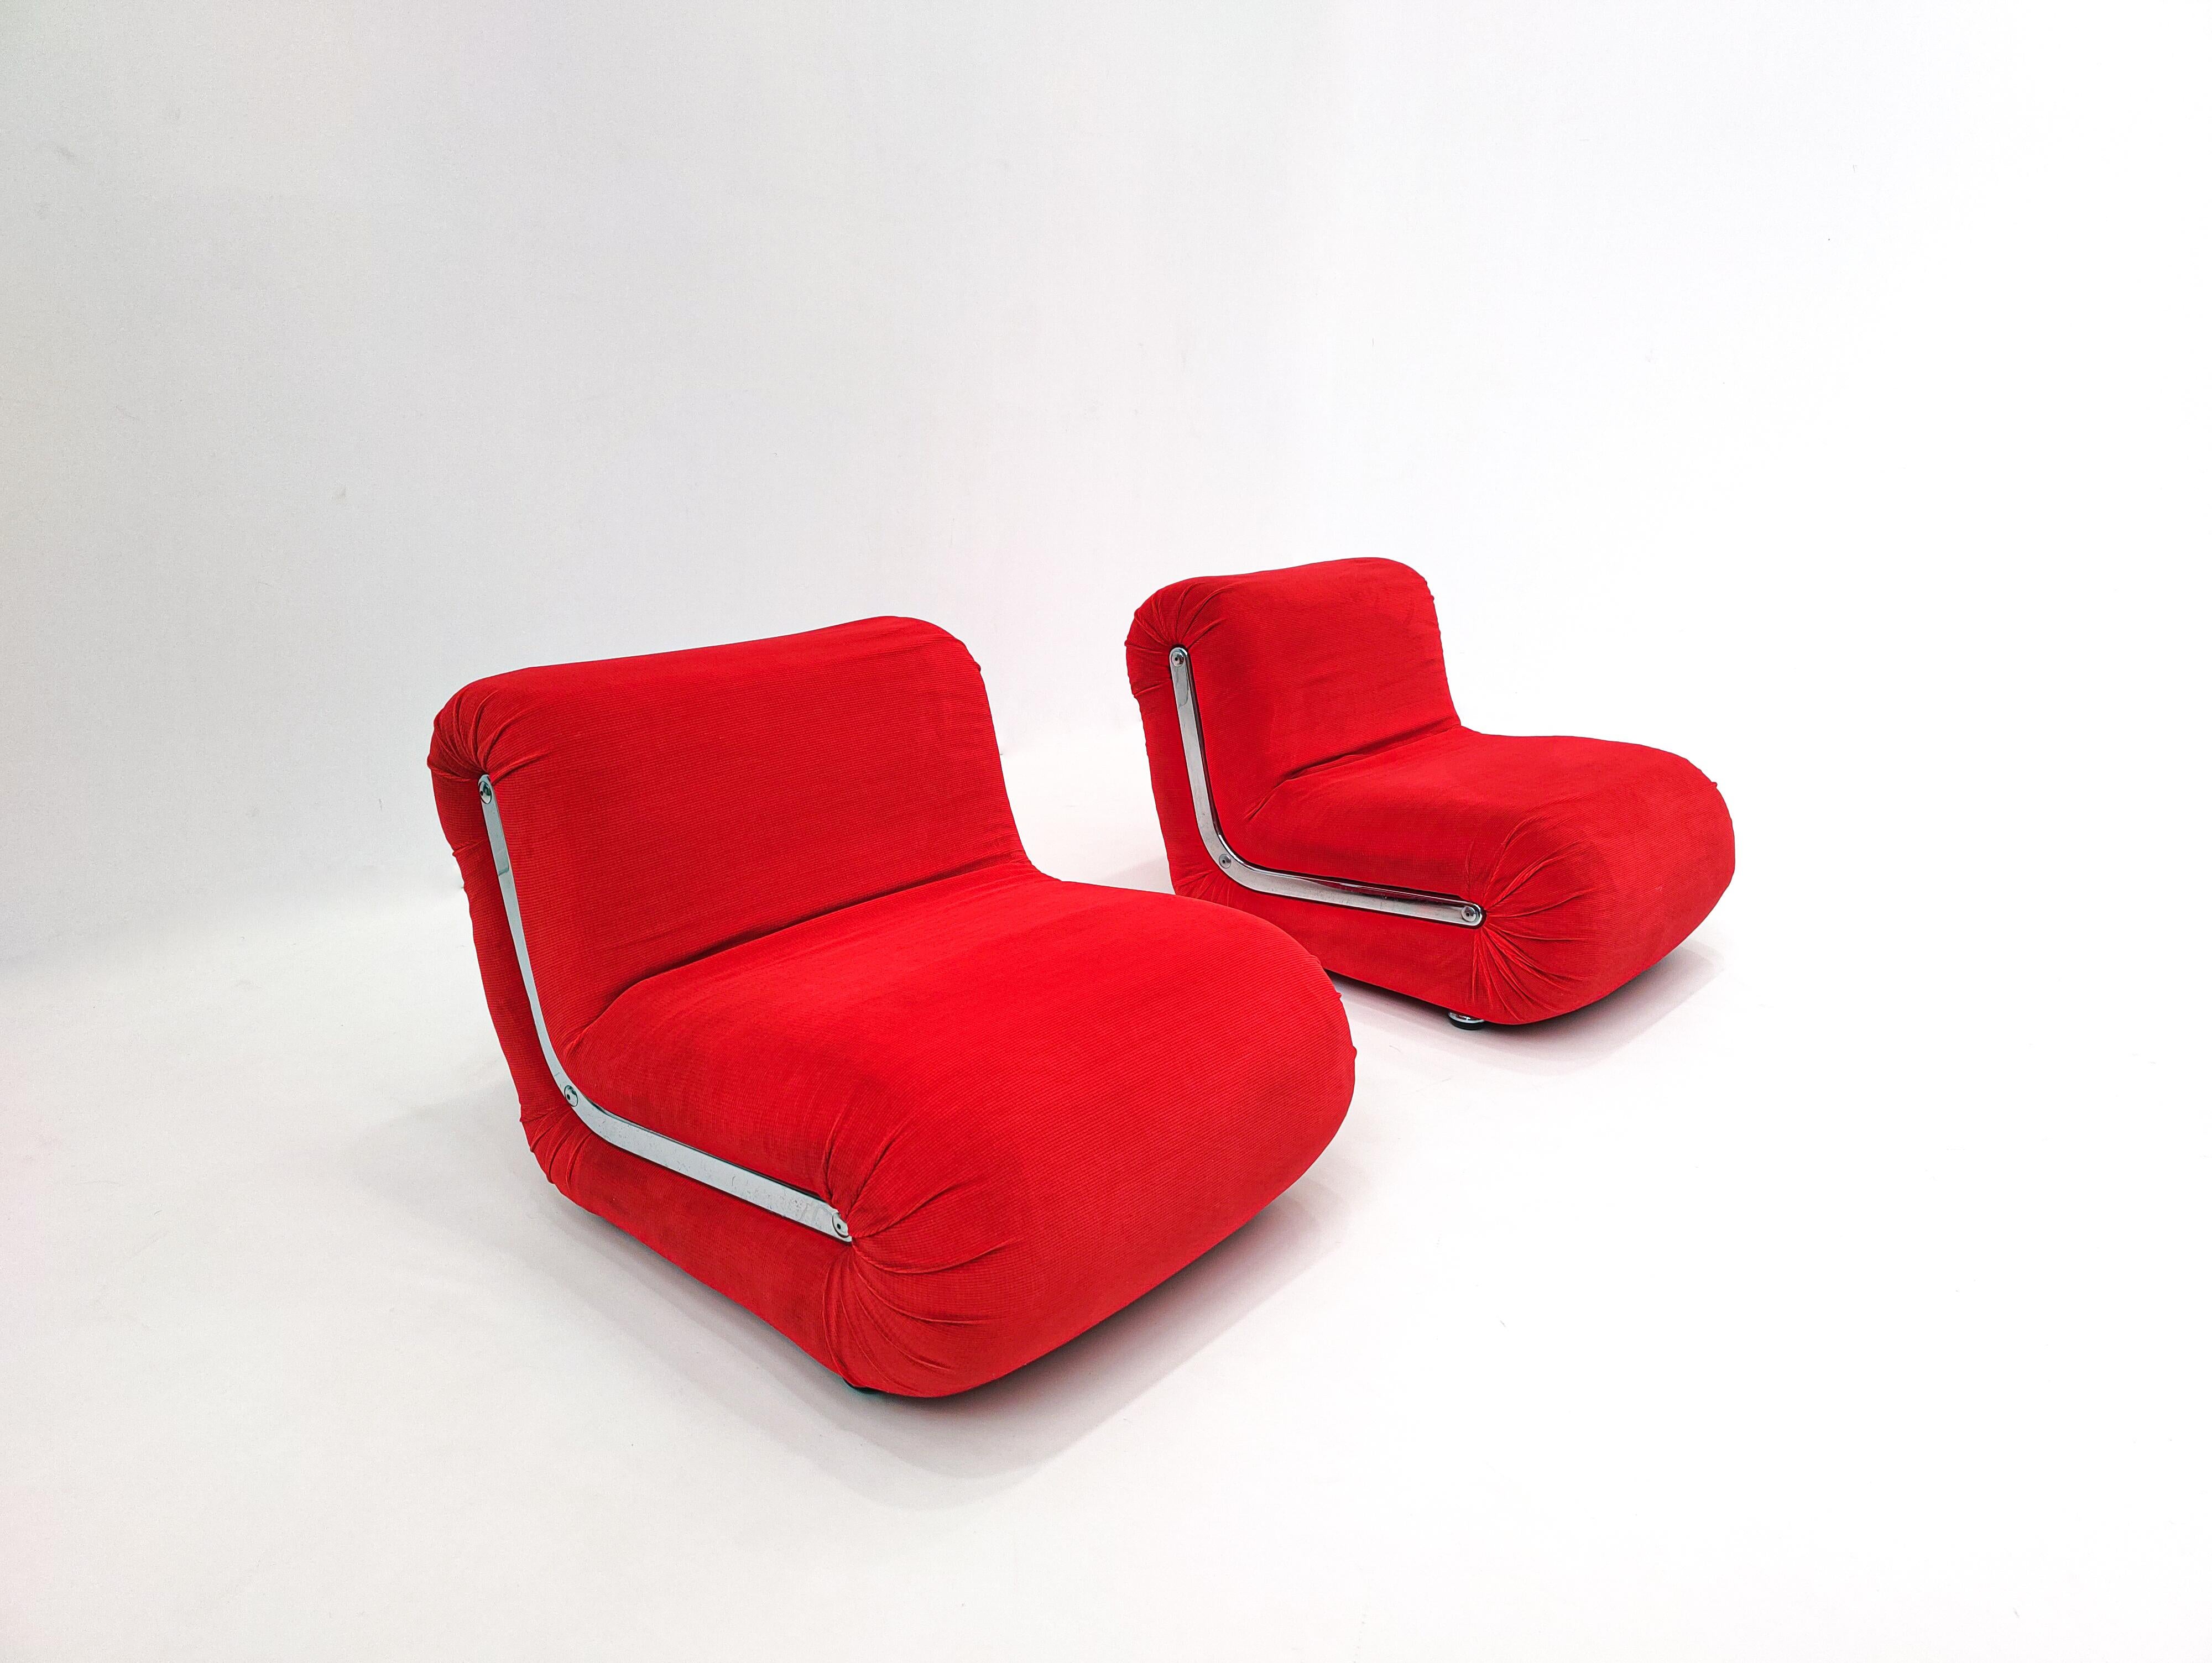 Pair of Red Boomerang Easy Chairs by Rodolfo Bonetto, 1960s, Italy.